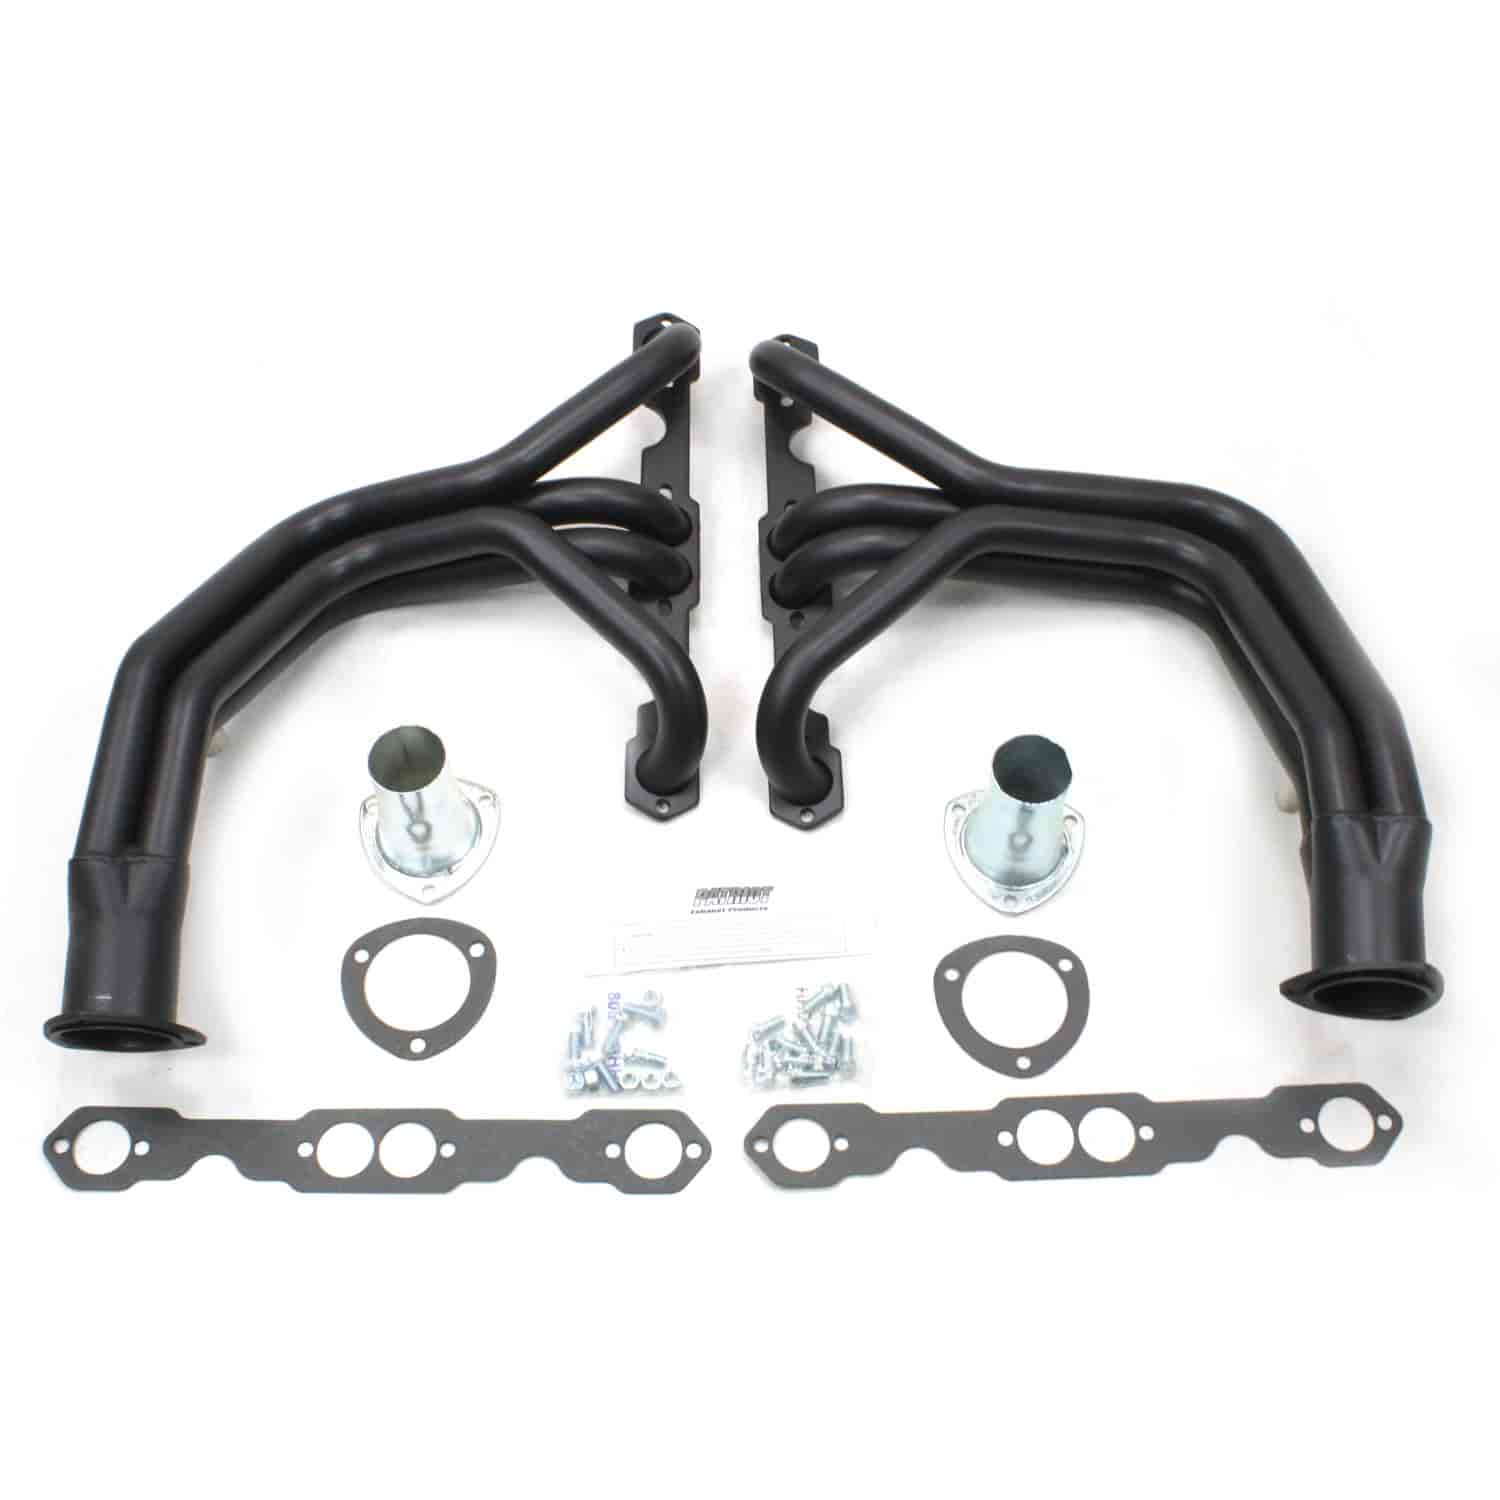 265-400 Small Block Header Chevy Engine on Ford Chassis Hi-Temp Black Coating